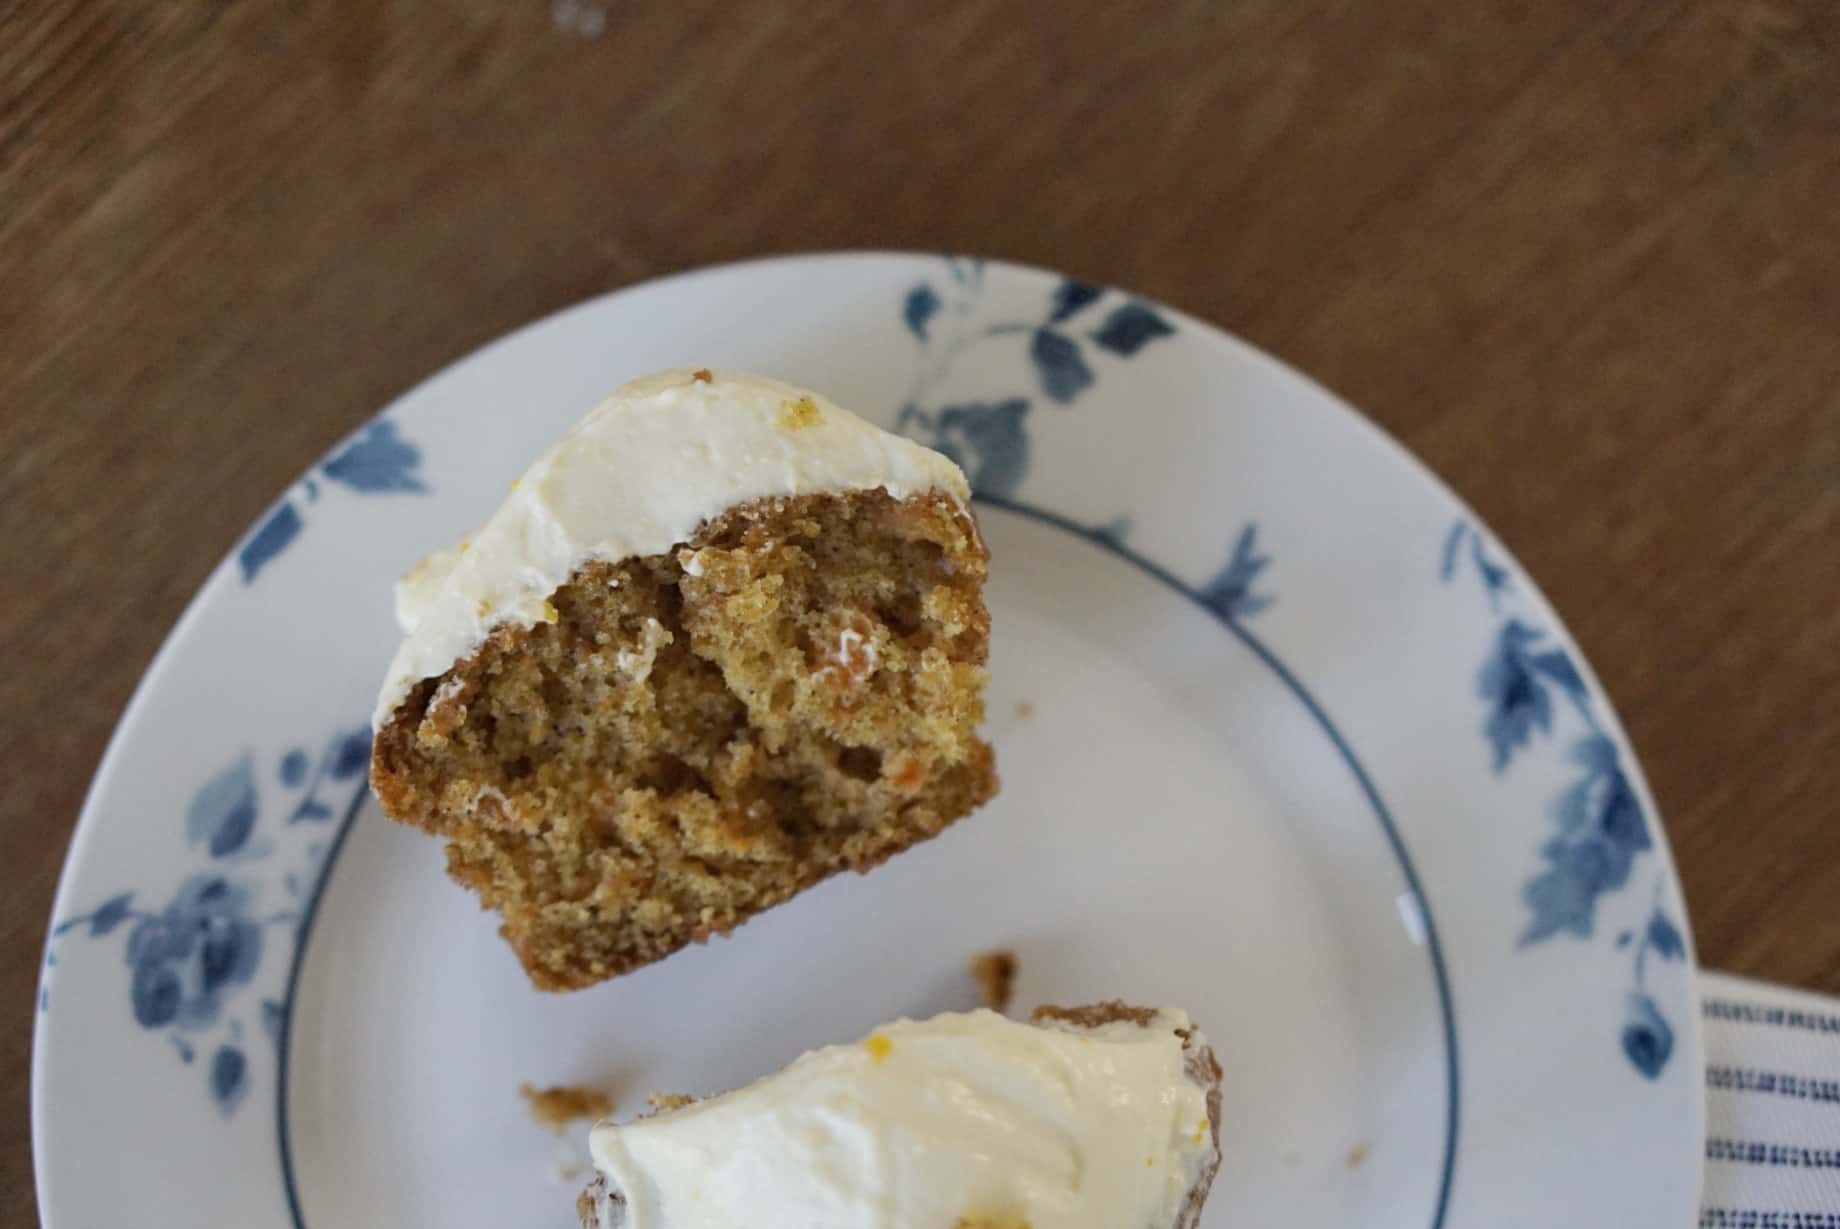 Carrot cake with cream cheese icing toppingwww.extraordinarychaos.com